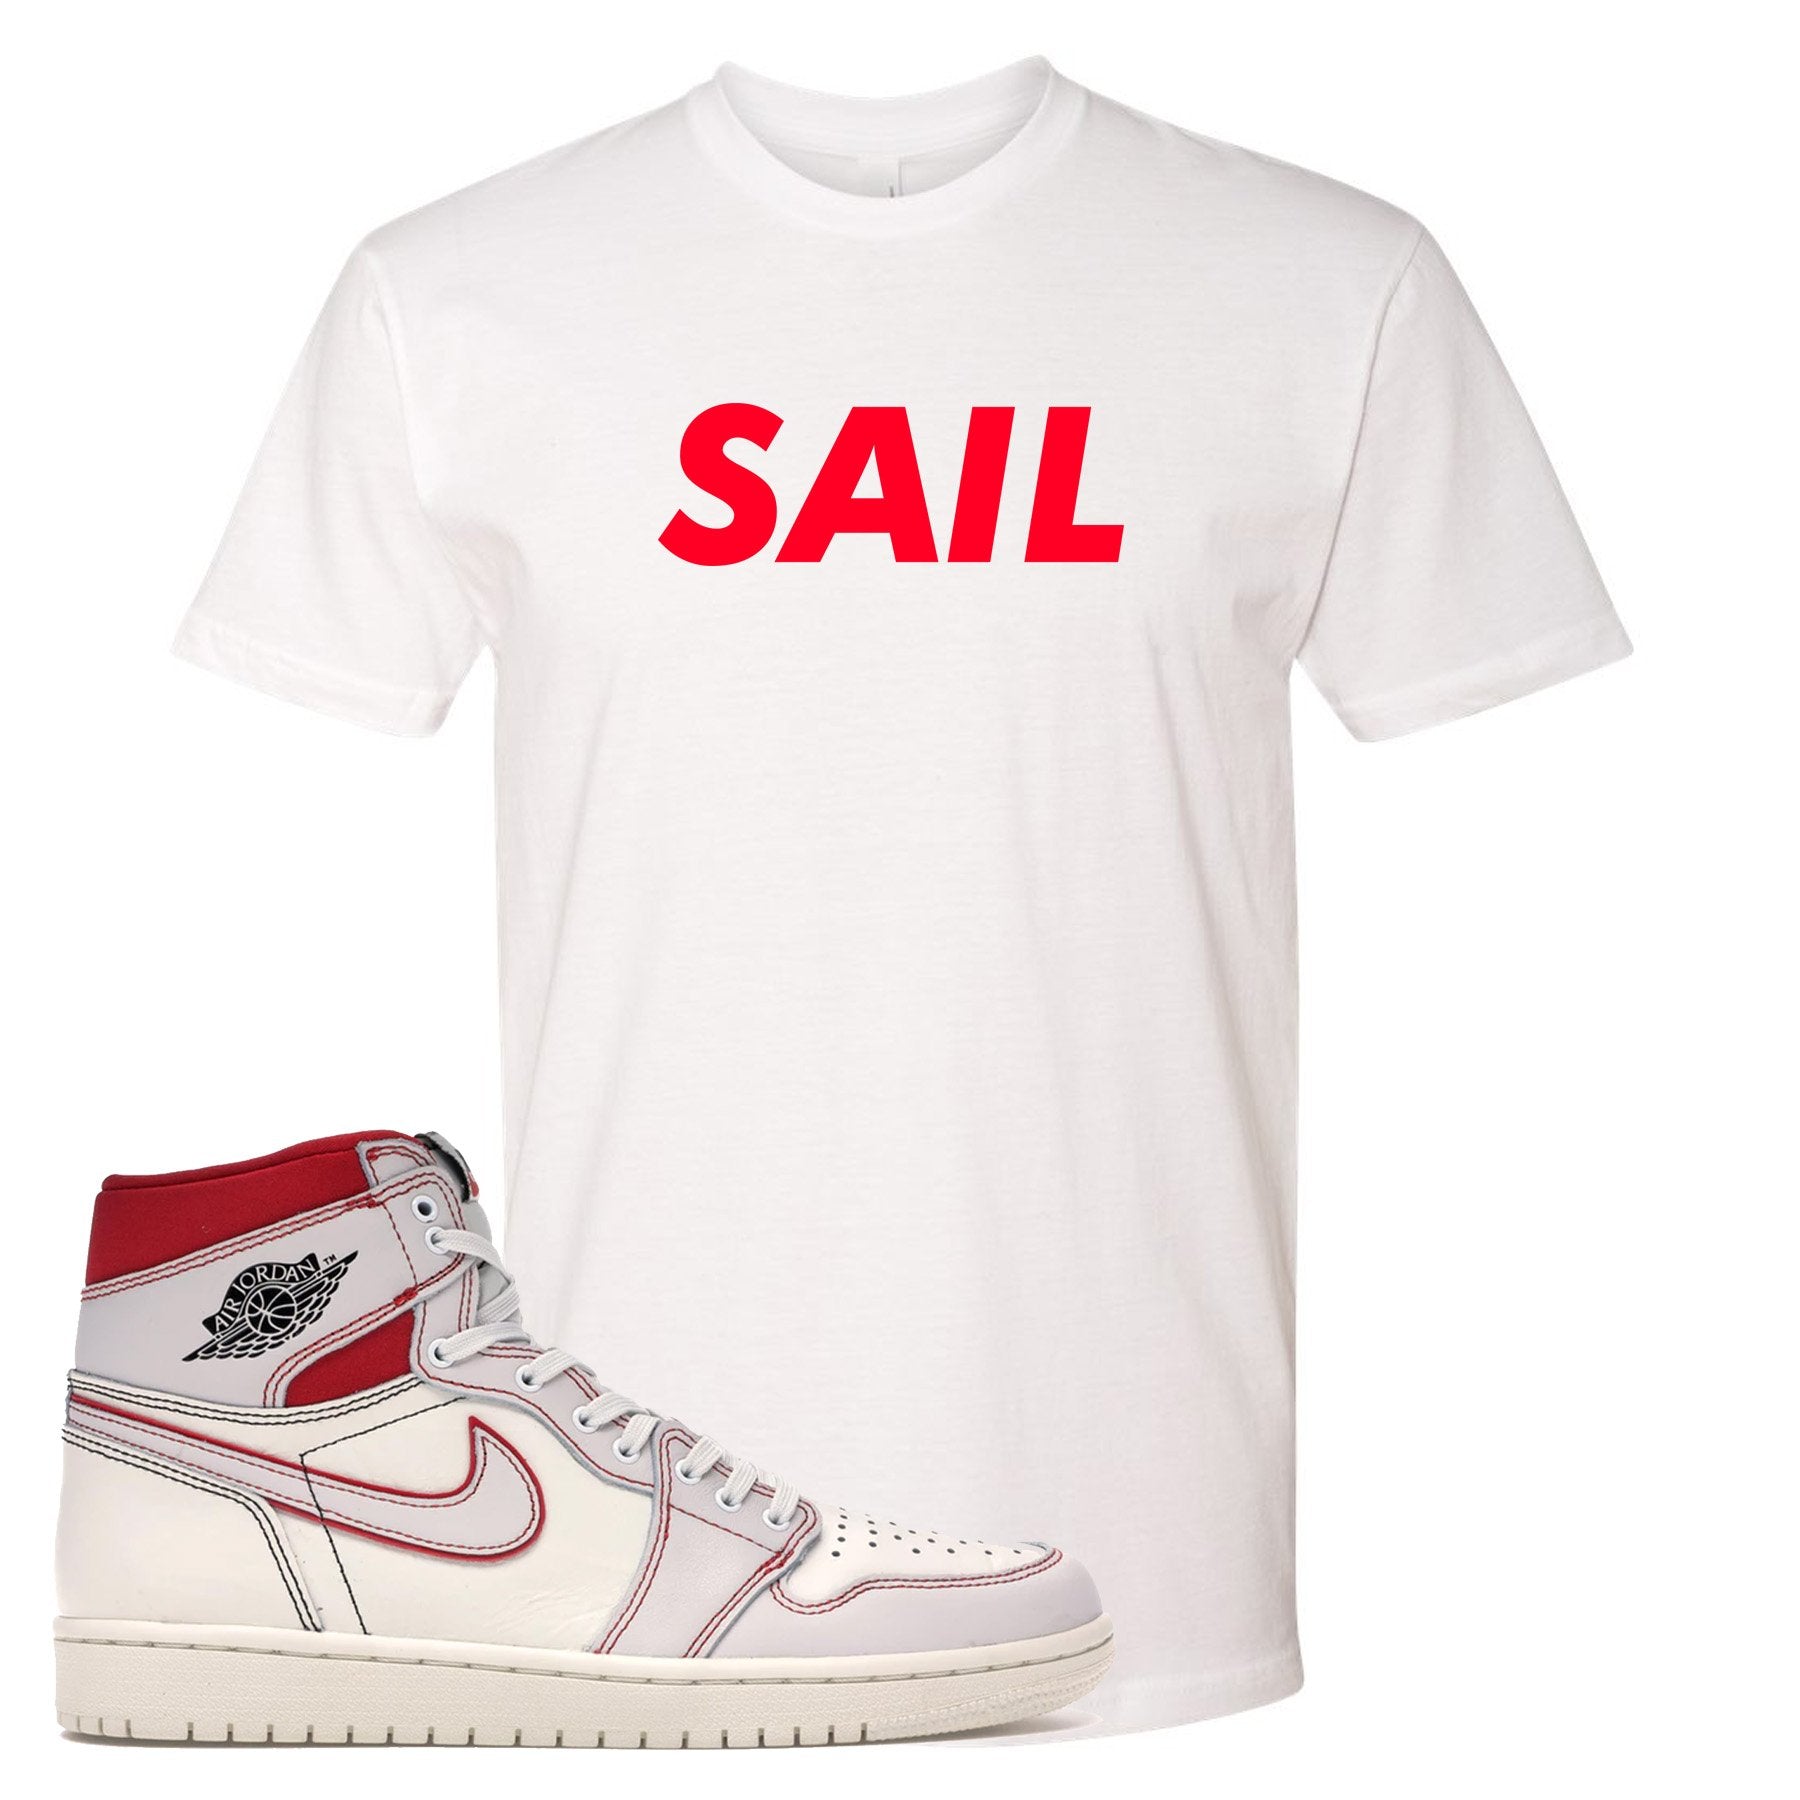 White and red t-shirt to match the white and red High Retro Jordan 1 shoes